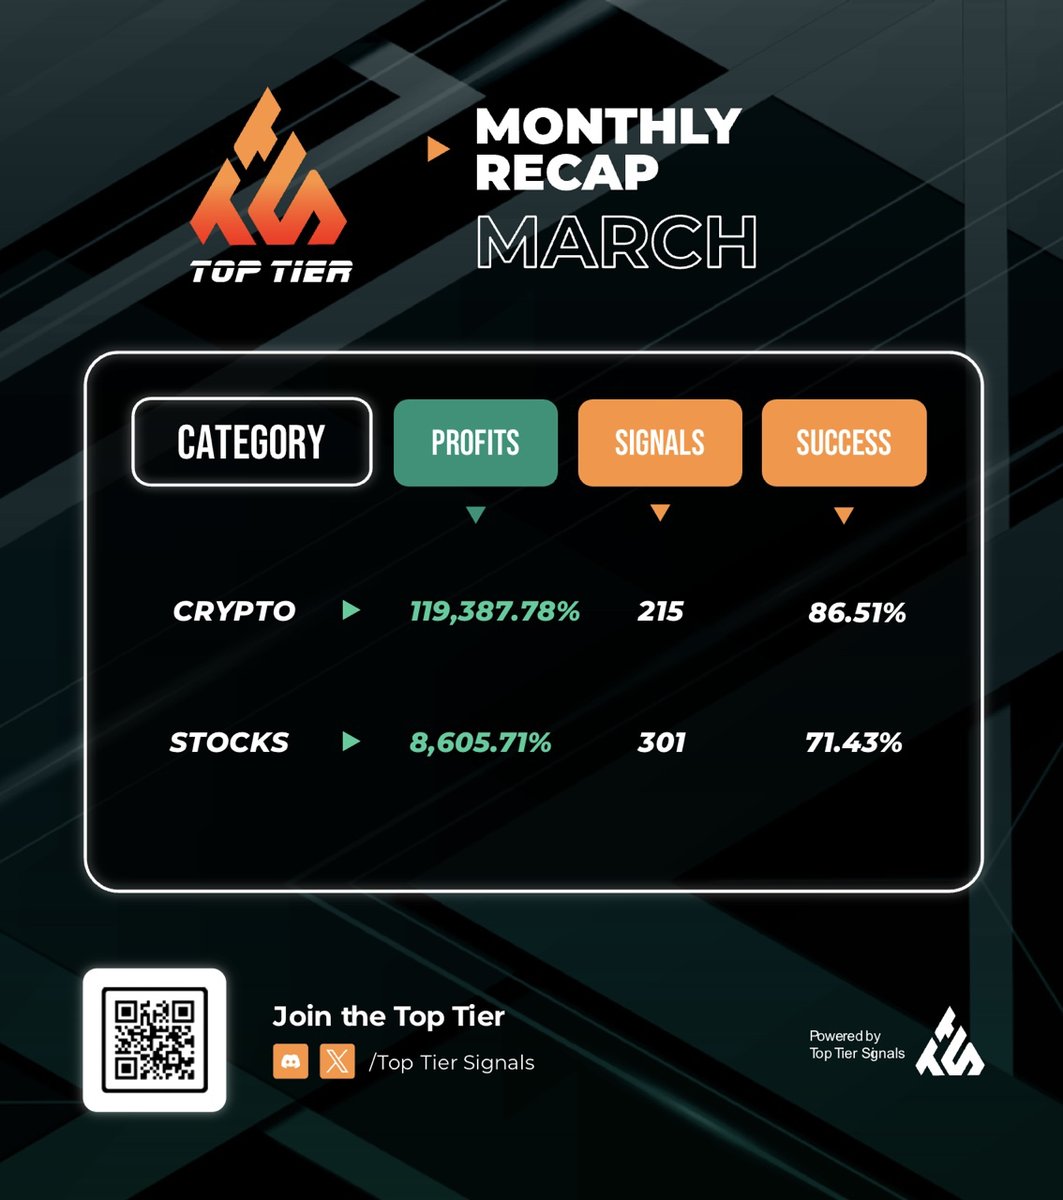 March Monthly Trading Recap🐋 Another month, another set of legendary signals from our team of Trading Analysts! Link in bio👀 0.2 $ETH Giveaway | 4 Winners 🔹Like, RT + Tag 3 Friends 🔹Enter on Discord